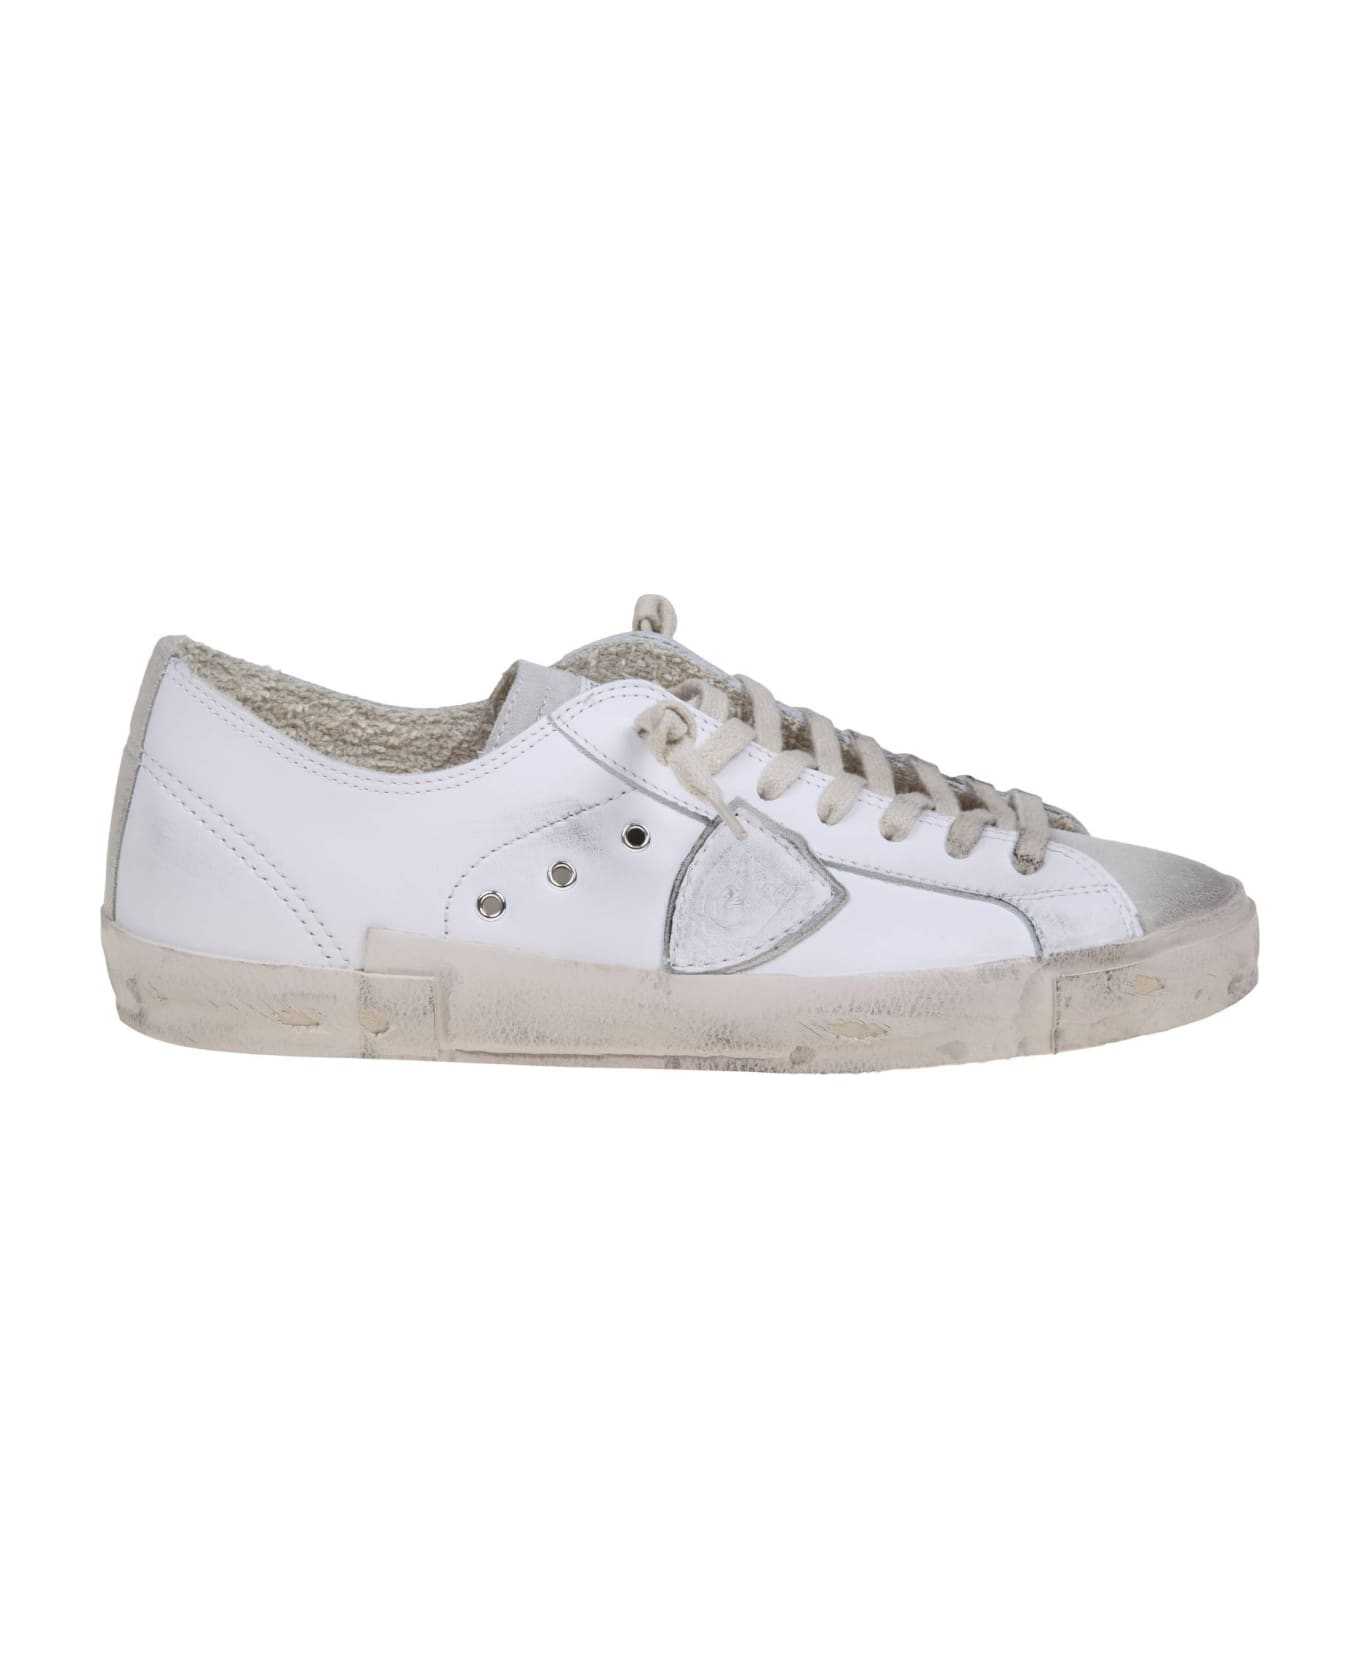 Philippe Model Prsx Low Sneakers In White Leather And Suede - Bianco